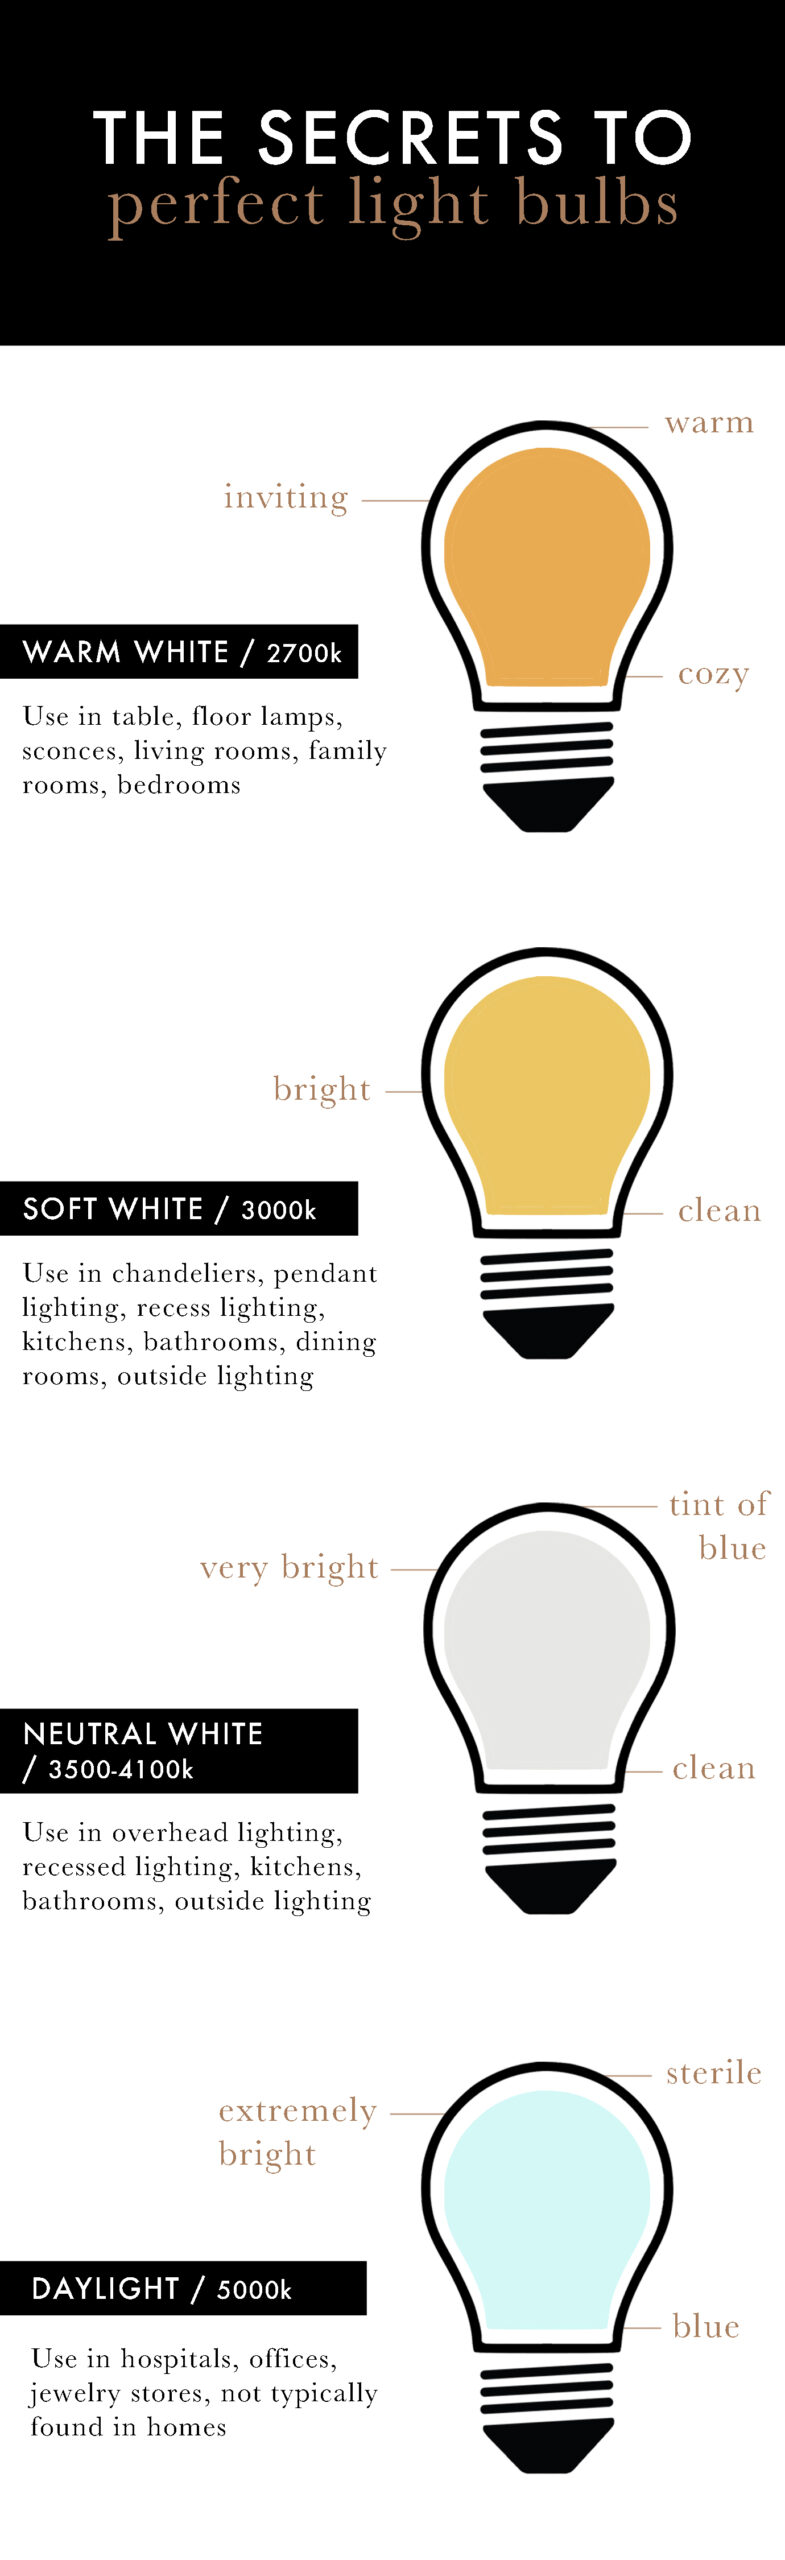 THE SECRETS TO THE PERFECT LIGHT BULBS image 1